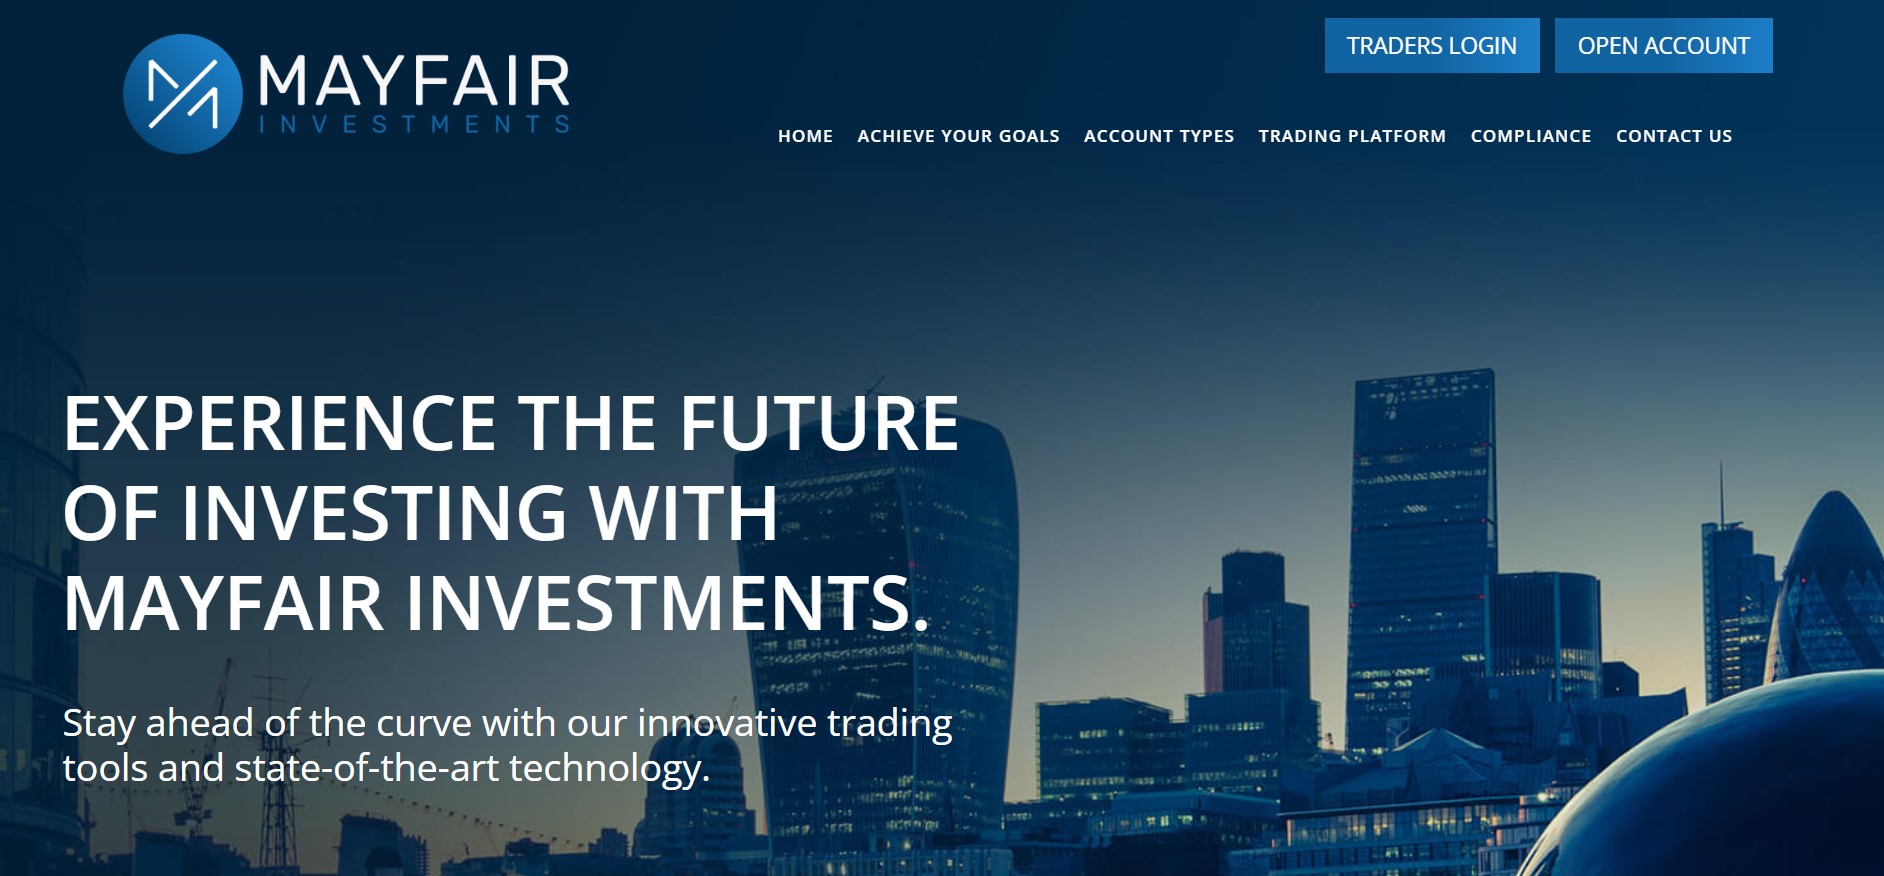 Mayfair Investments website